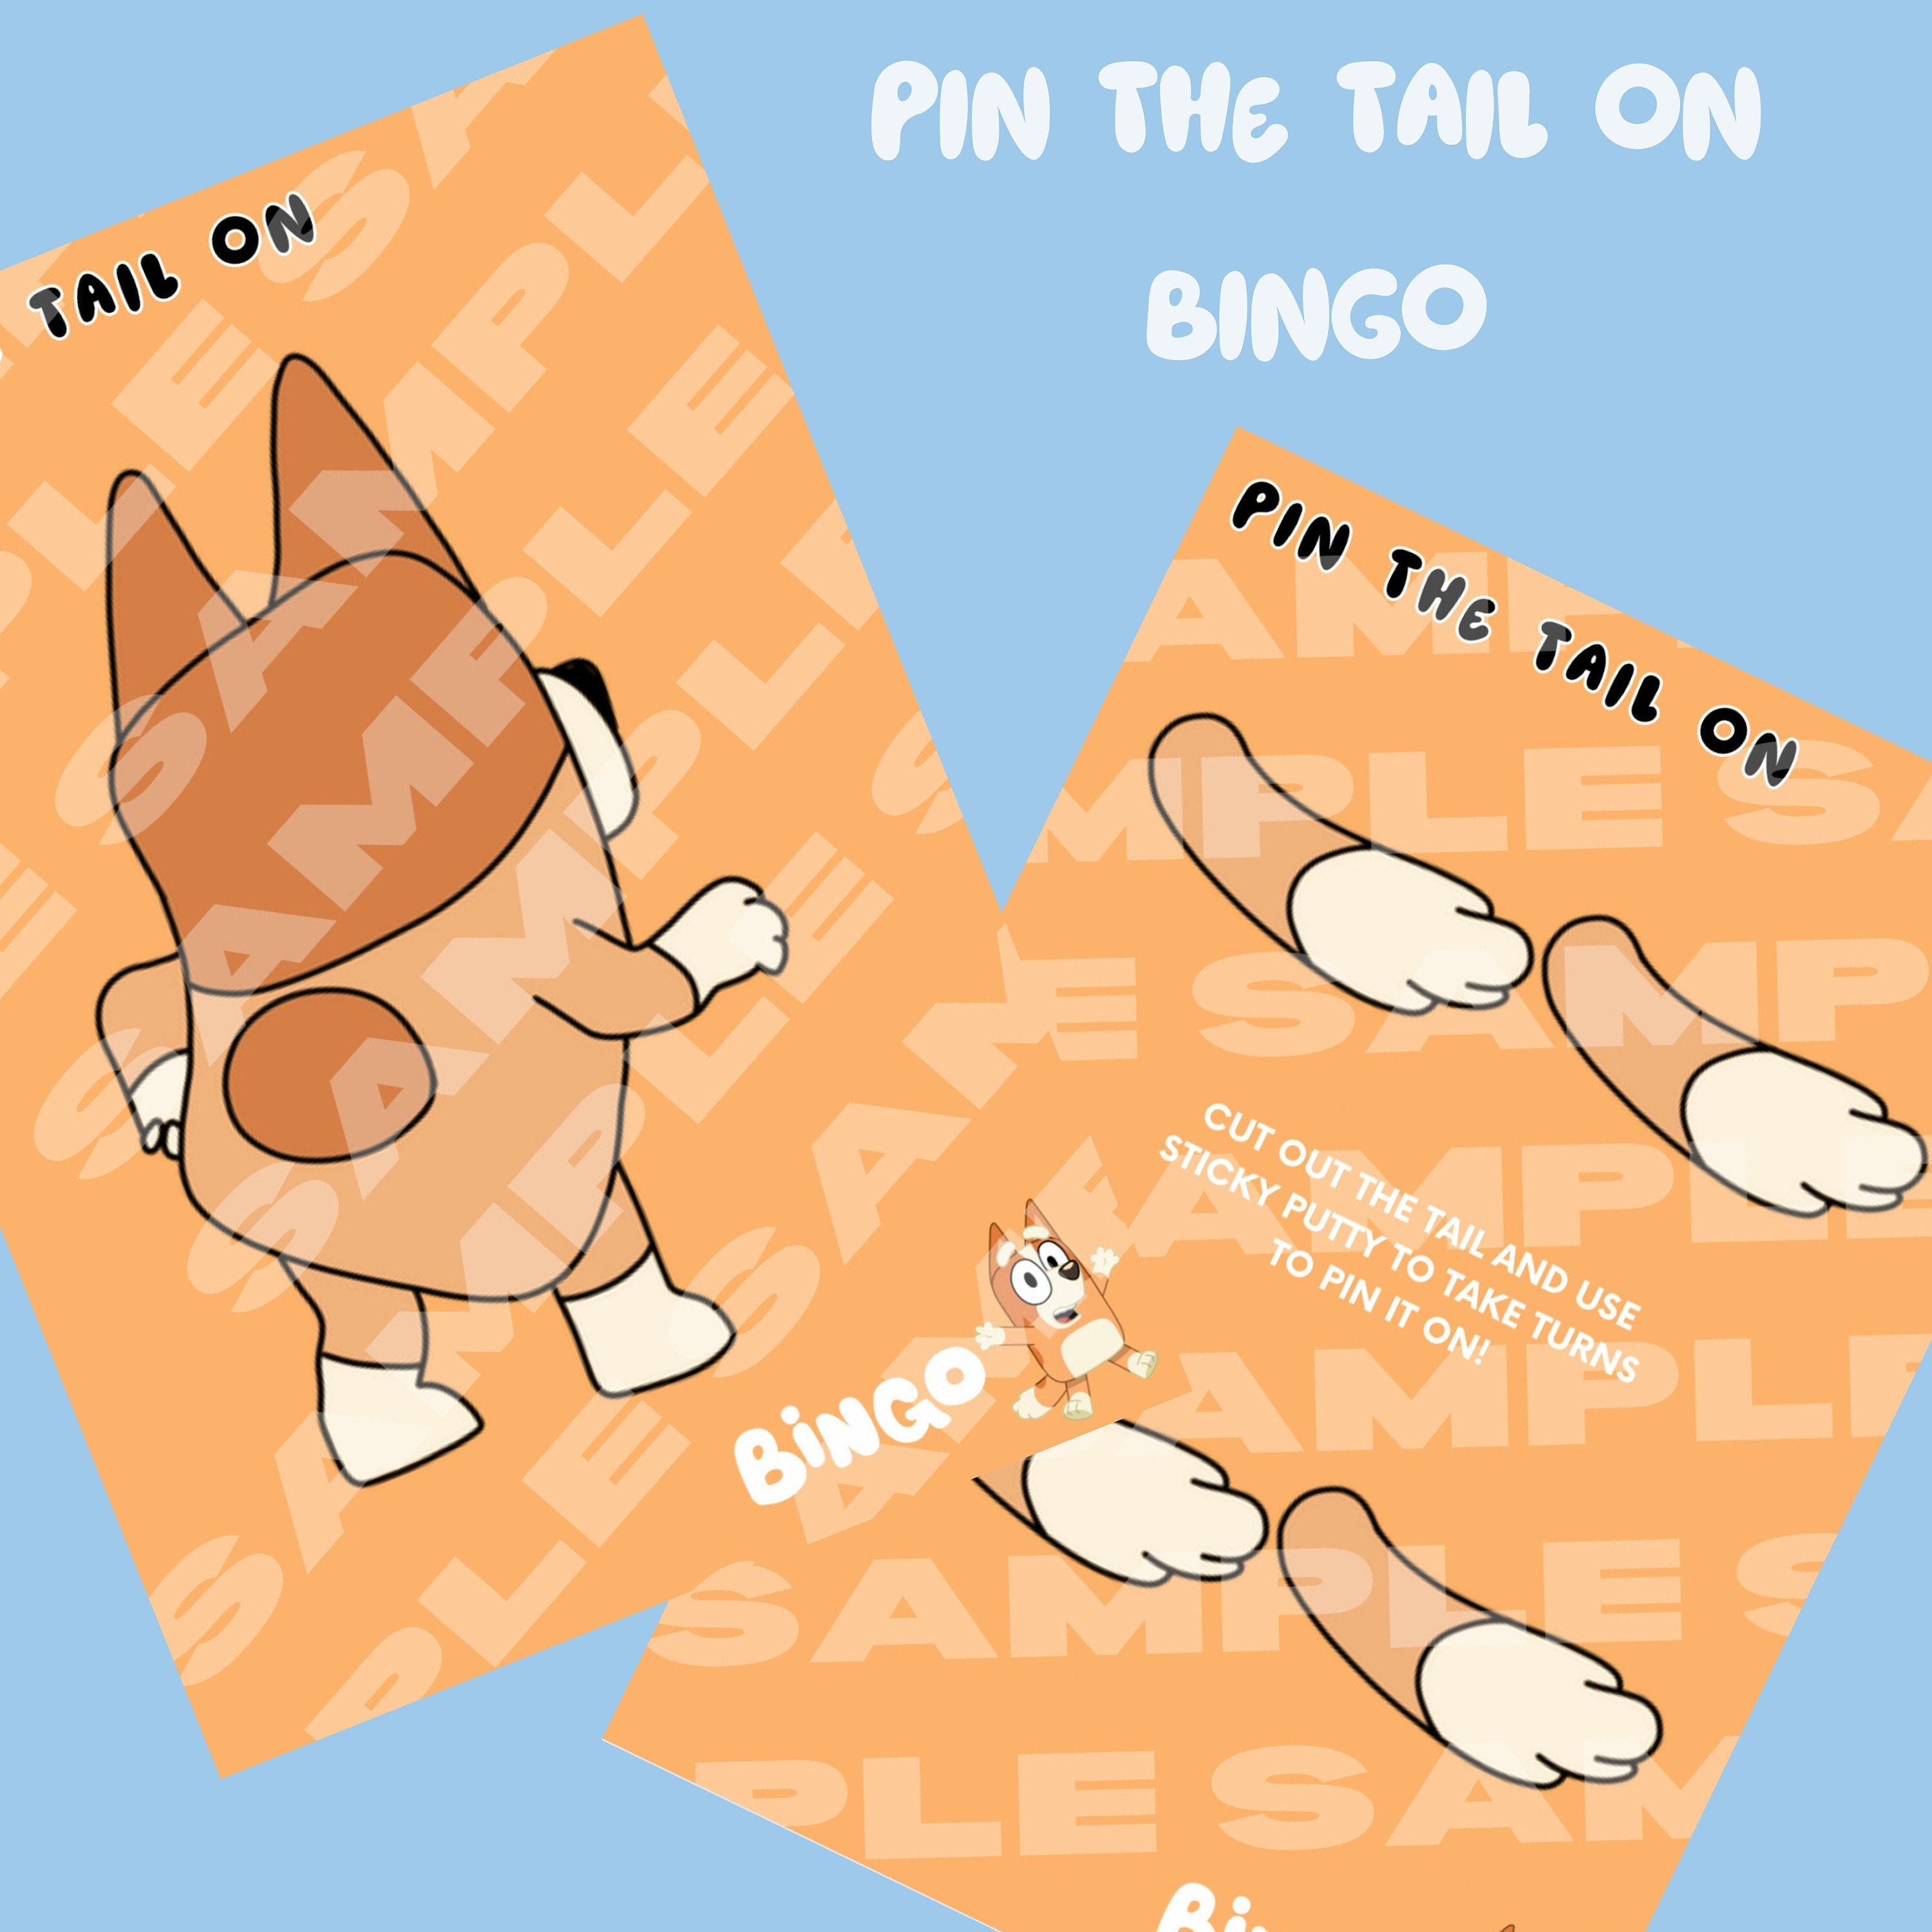 Pin the tail on the Orange dog (Bluey Bingo inspired) party game for kids